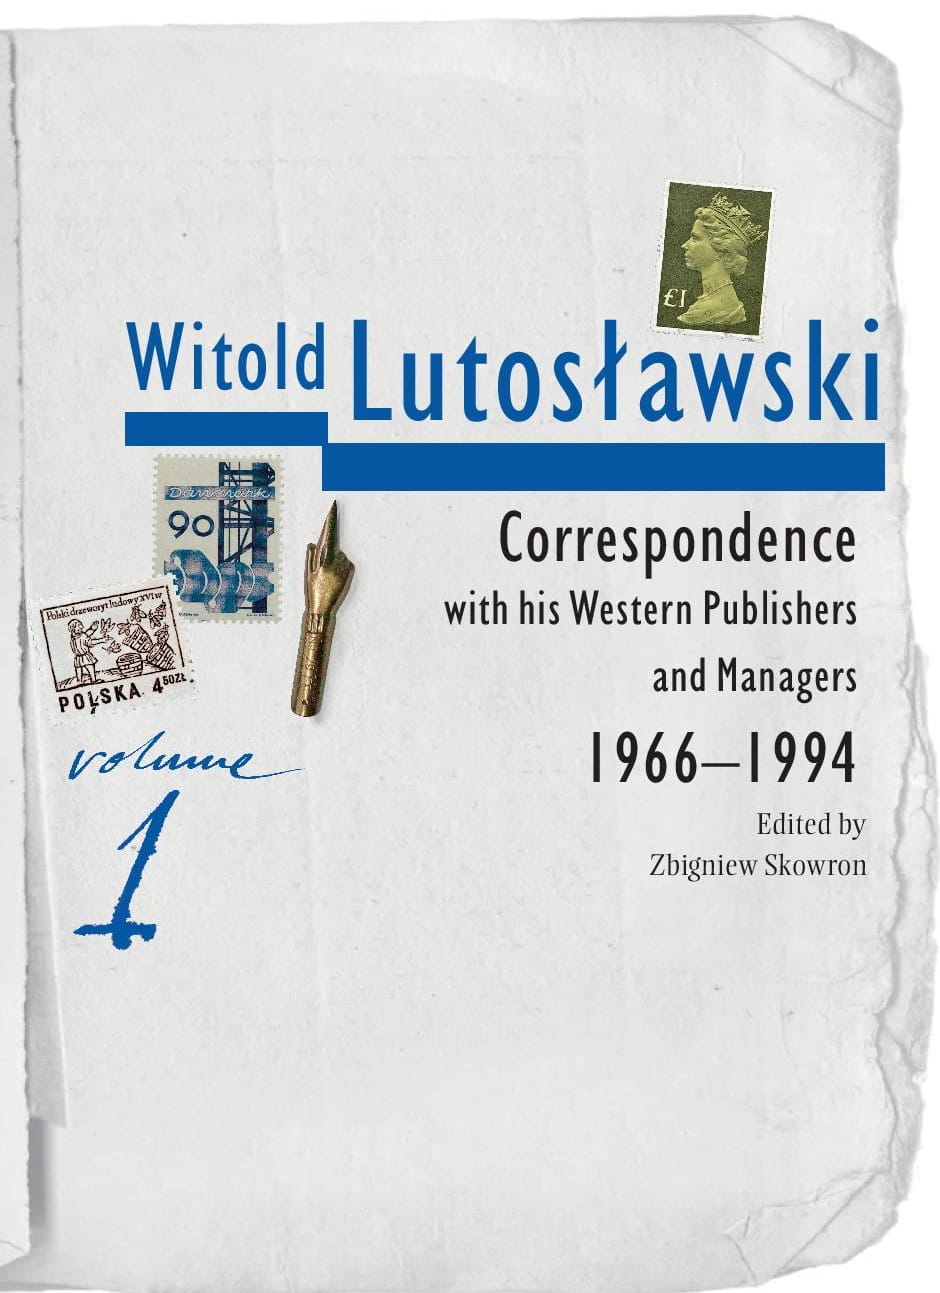 Zbigniew Skowron: Witold Lutosławski. Correspondence with his Western Publishers and Managers, 1966–1994. Vol. 1